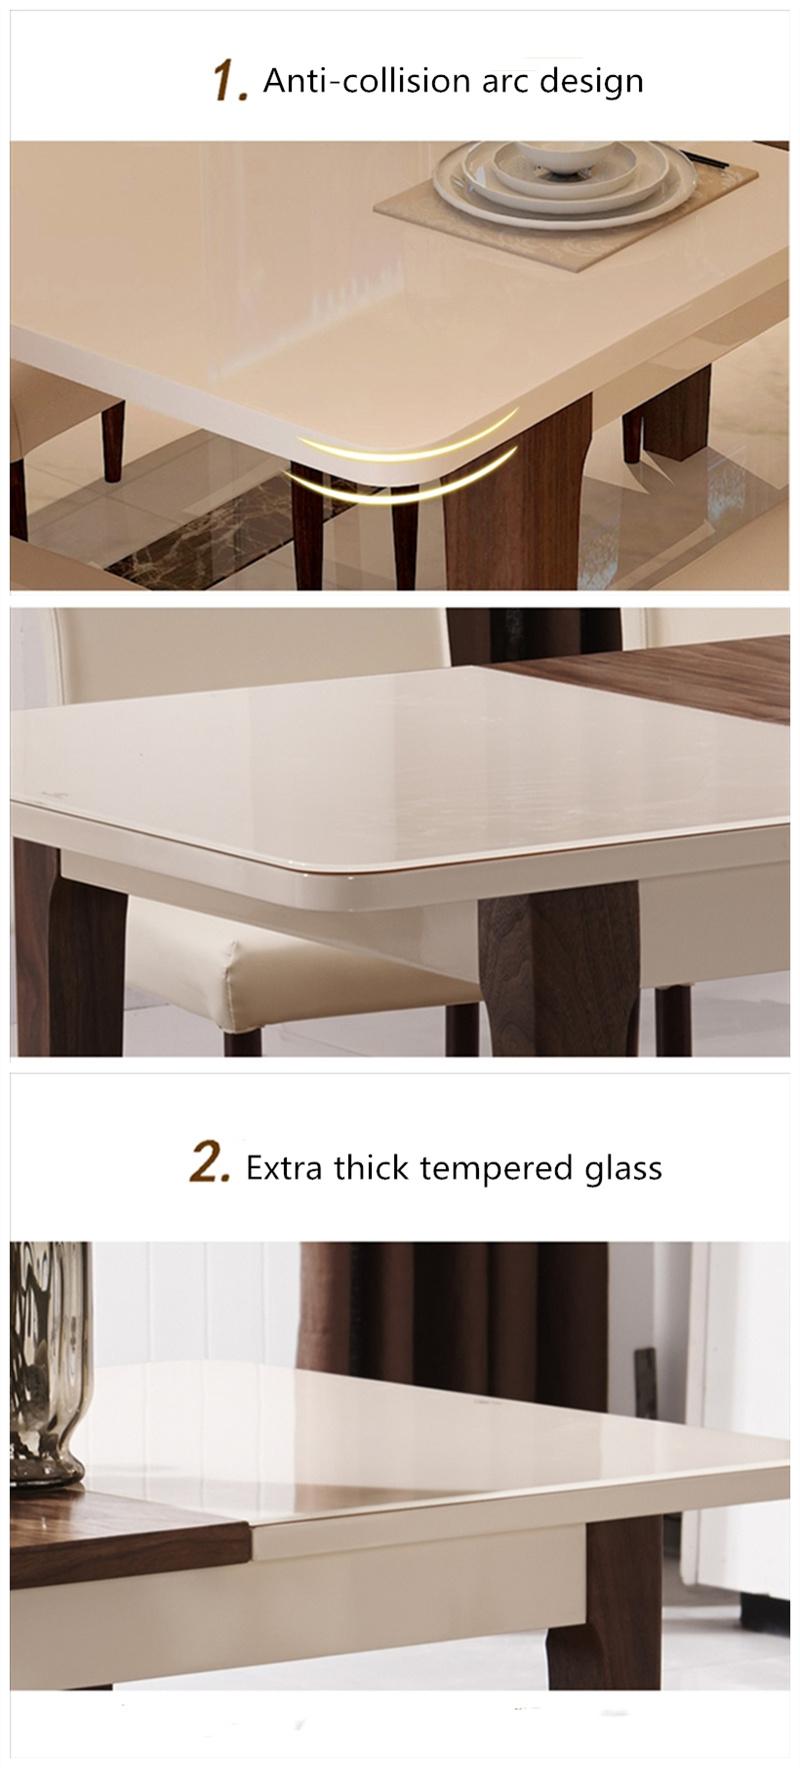 Modern Cheap White Wooden MDF Dining Room Furniture Restaurant Chair Dining Table